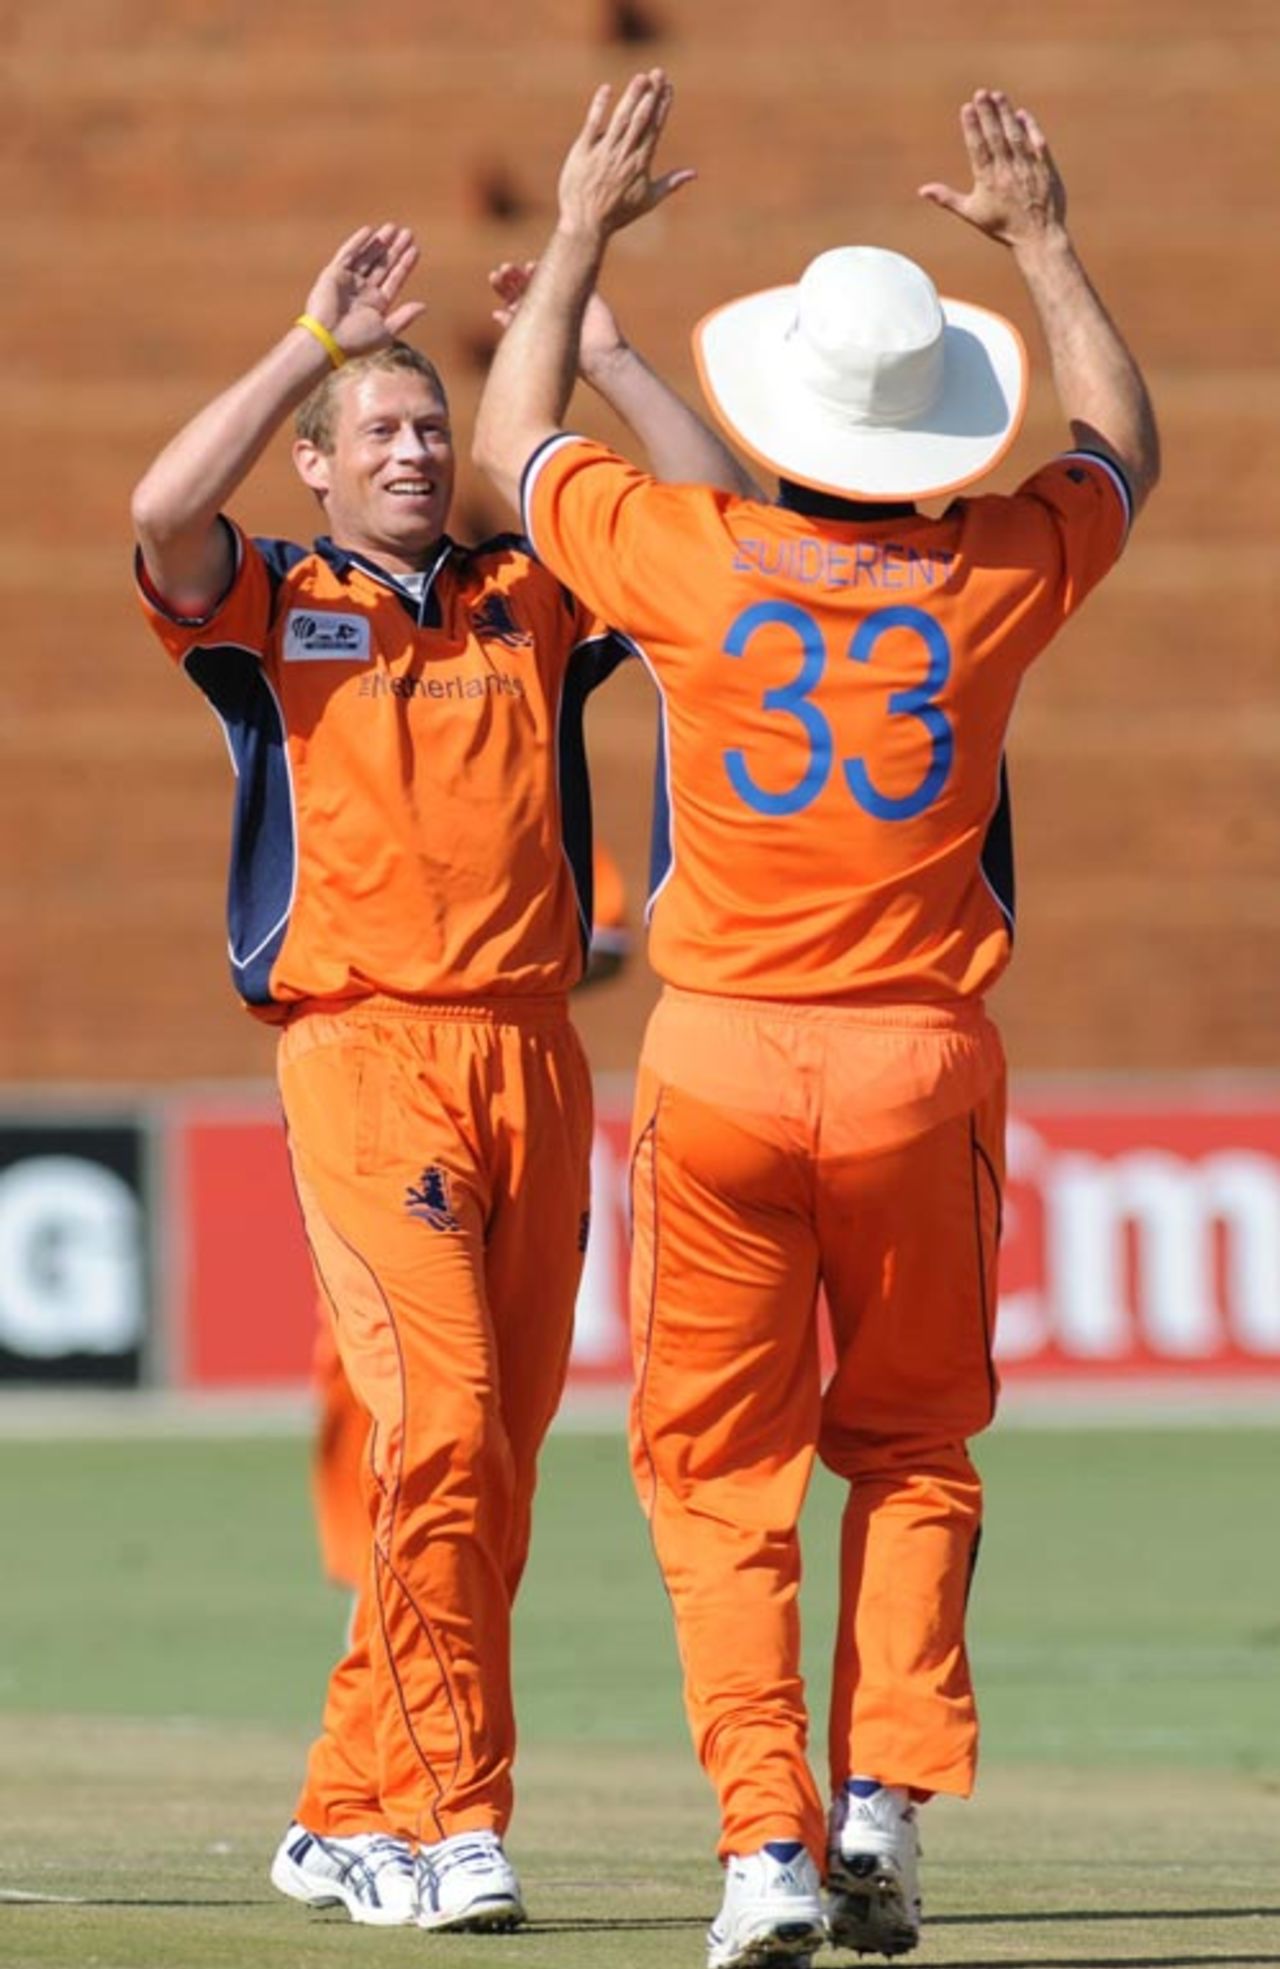 Edgar Schiferli is congratulated by Bas Zuiderent on taking a wicket, Netherlands v Scotland, ICC World Cup Qualifiers, Super Eights, Johannesburg, April 11, 2009
